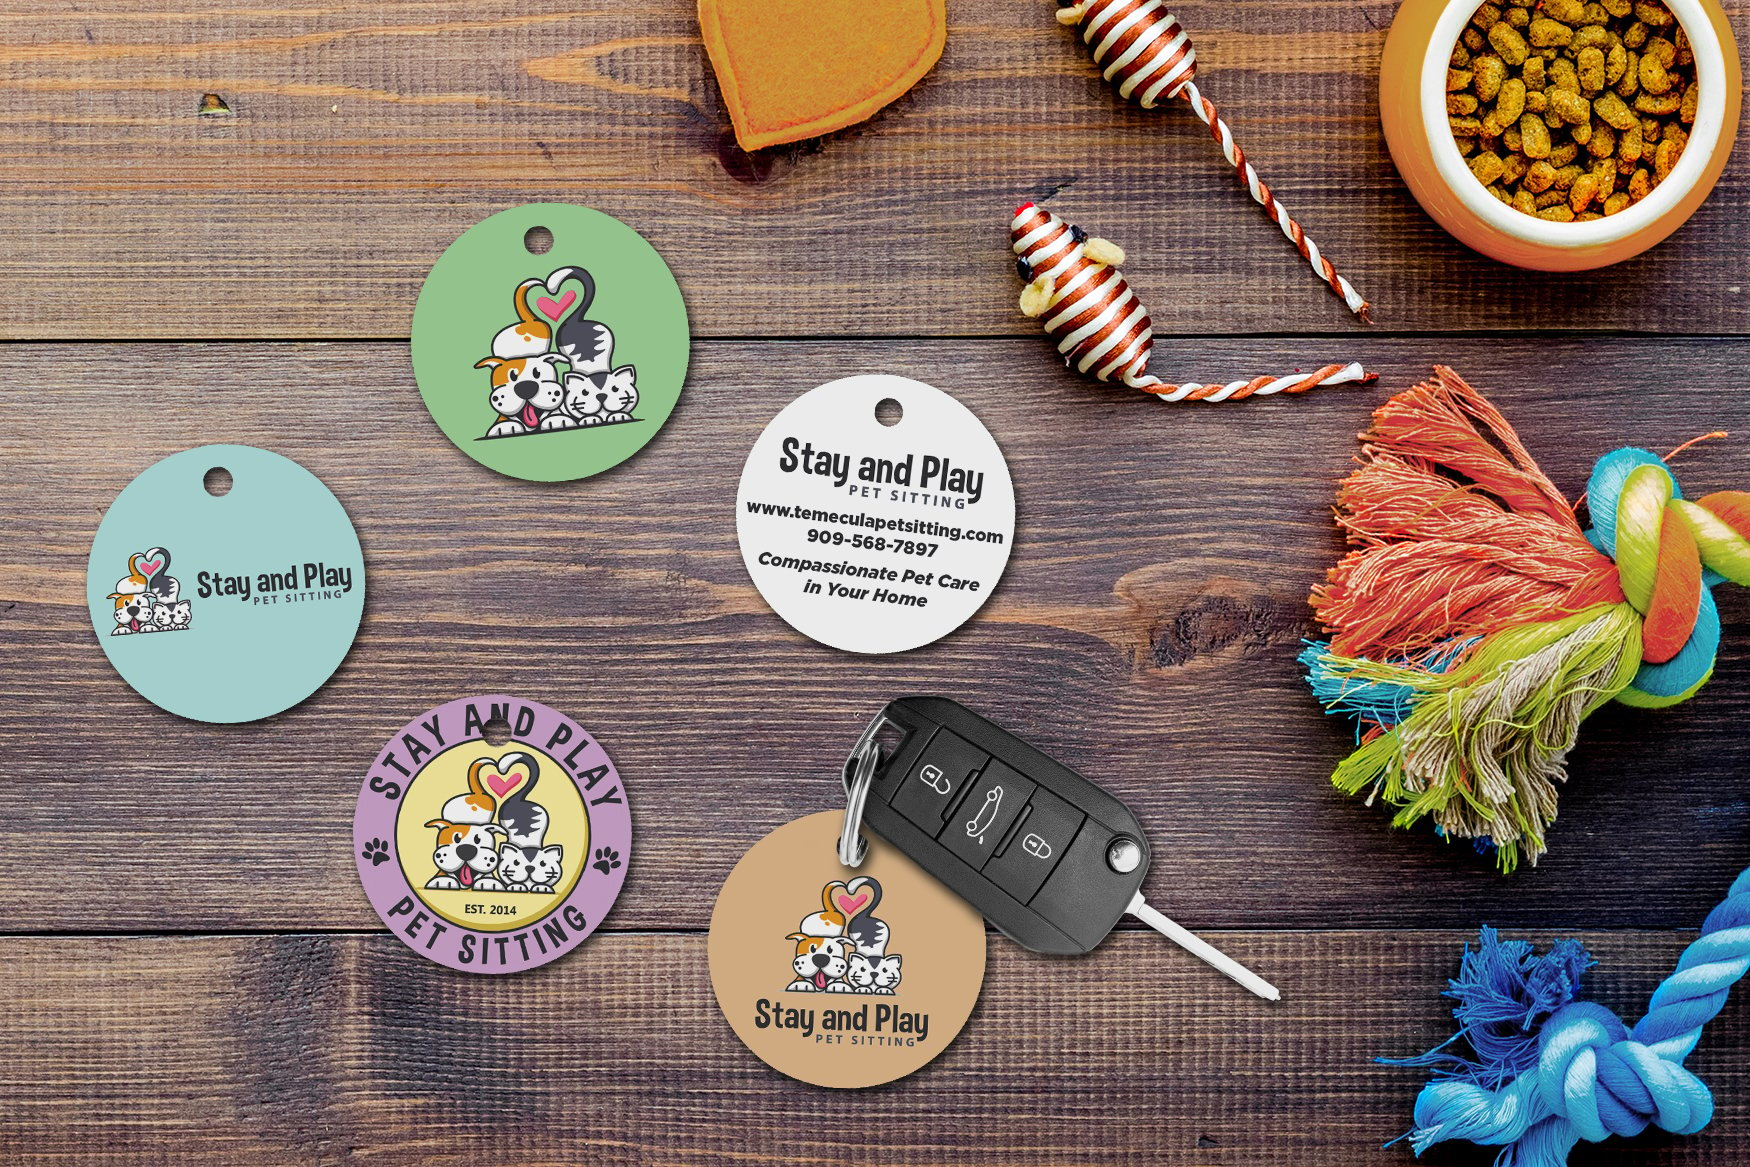 Promotional key tags for a pet sitting business